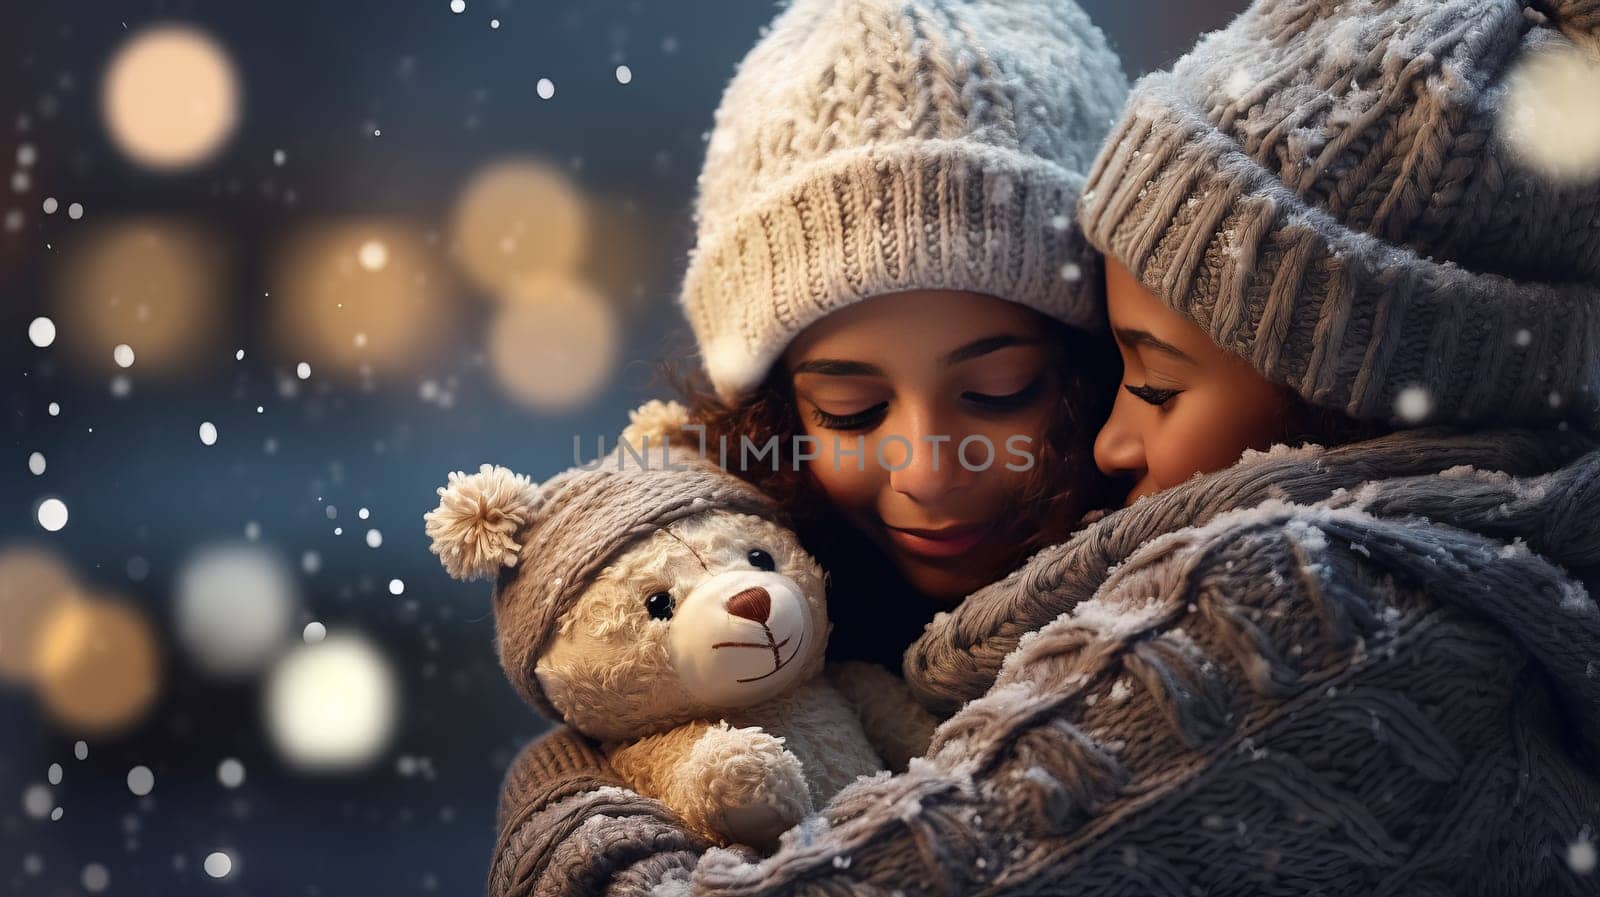 A person hug each other wearing a beige knit hat and scarf feels cozy and festive with blurred Christmas lights and snow in the background. High quality photo